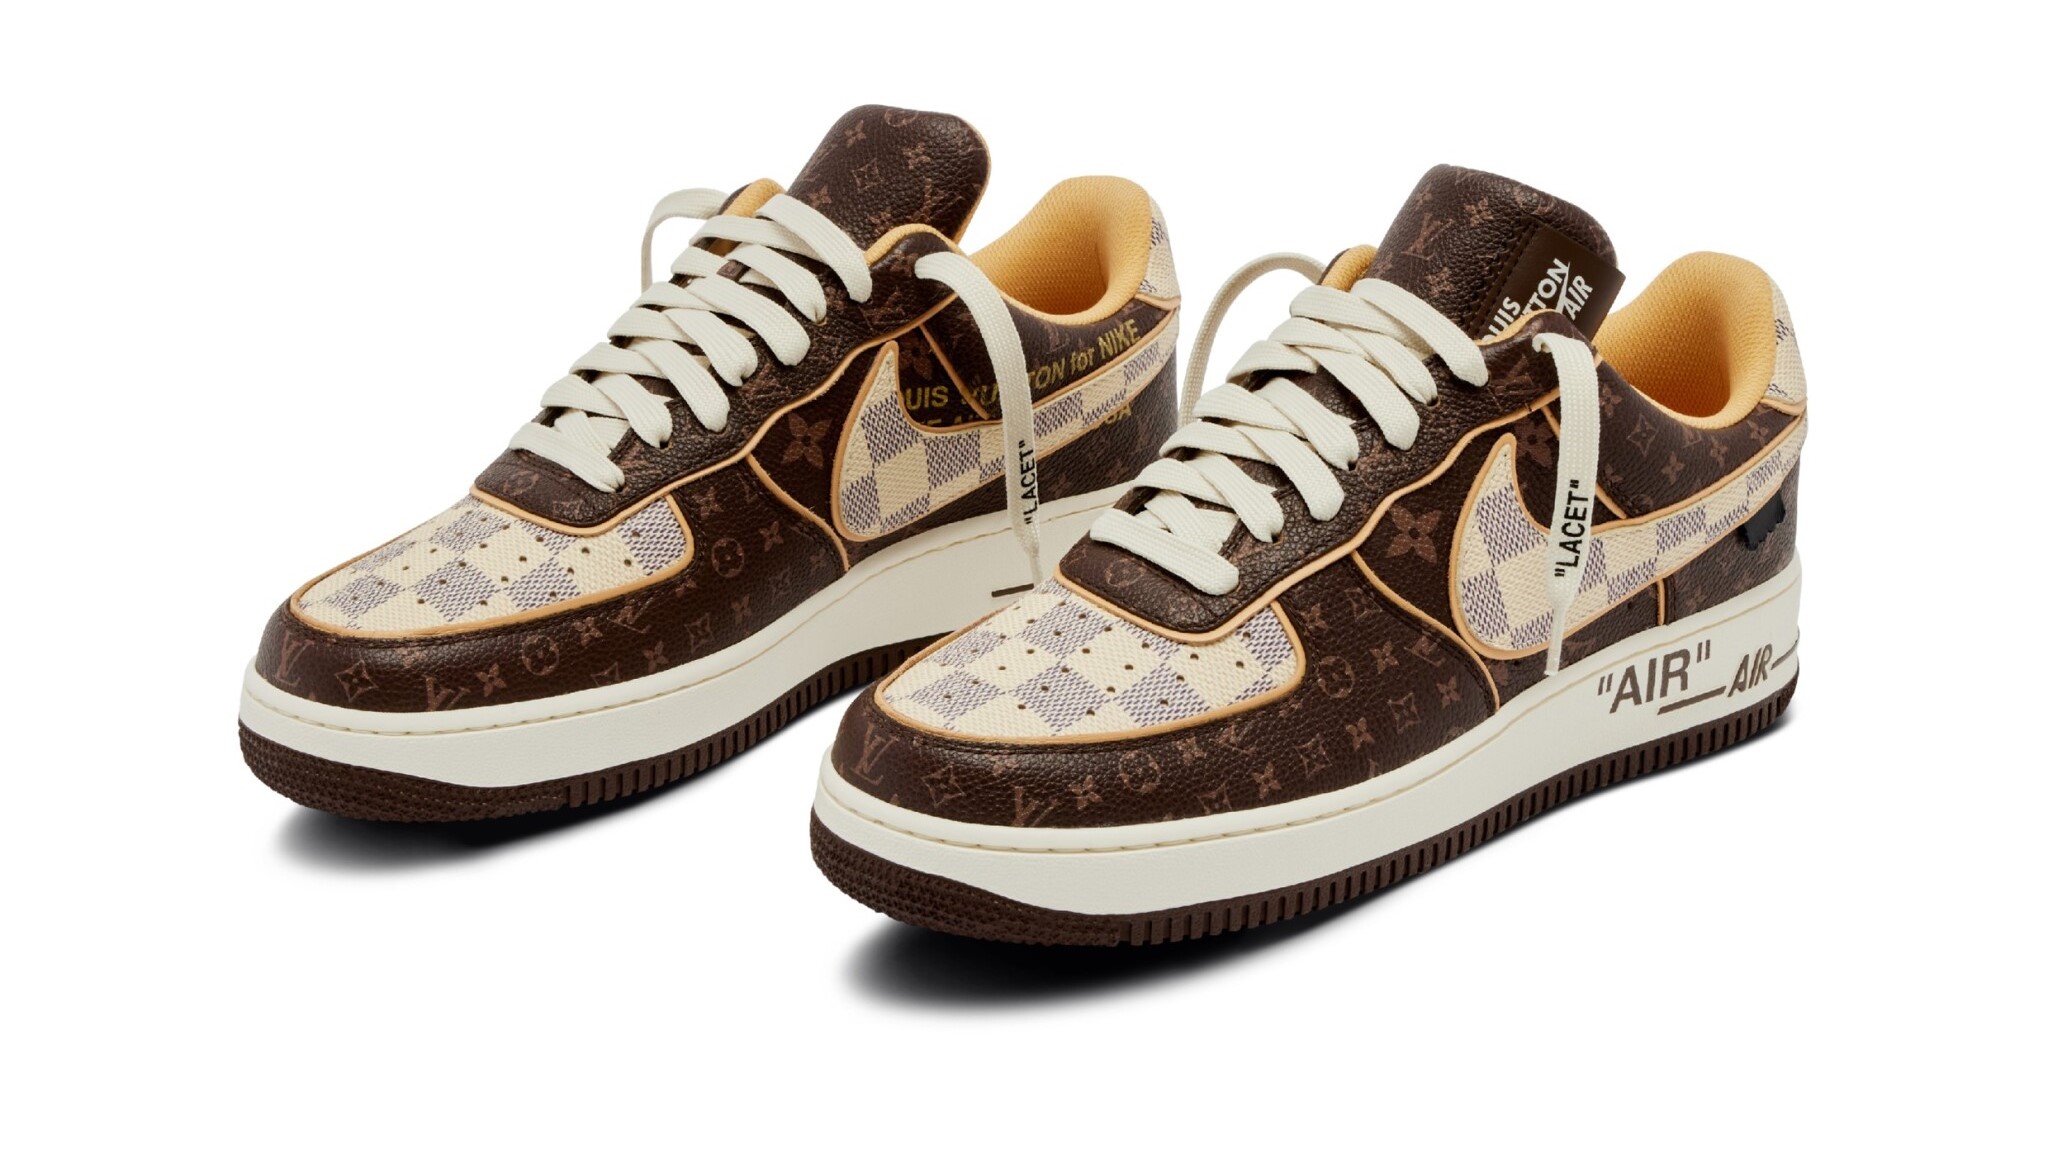 Nike x Louis Vuitton Air Force 1 Low & Pilot Case, Size 9, 40 for 40, The Air Force 1 Collection, 2022